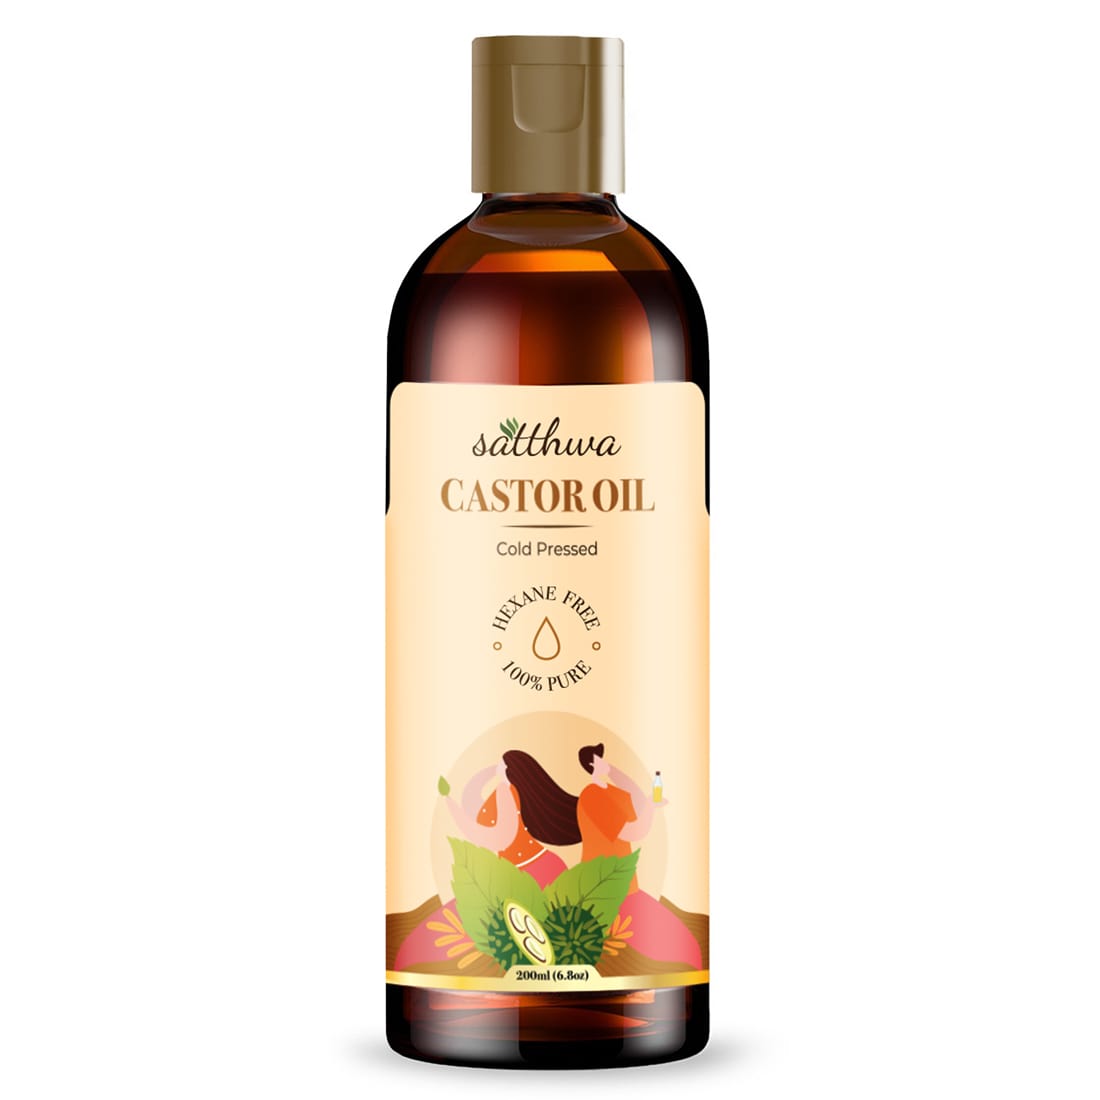 Buy Wow Skin Science 100% Pure Castor Oil - Cold Pressed - For Stronger  Hair, Skin & Nails - No Mineral Oil & Silicones, 200 Ml Online at Low  Prices in India - Amazon.in